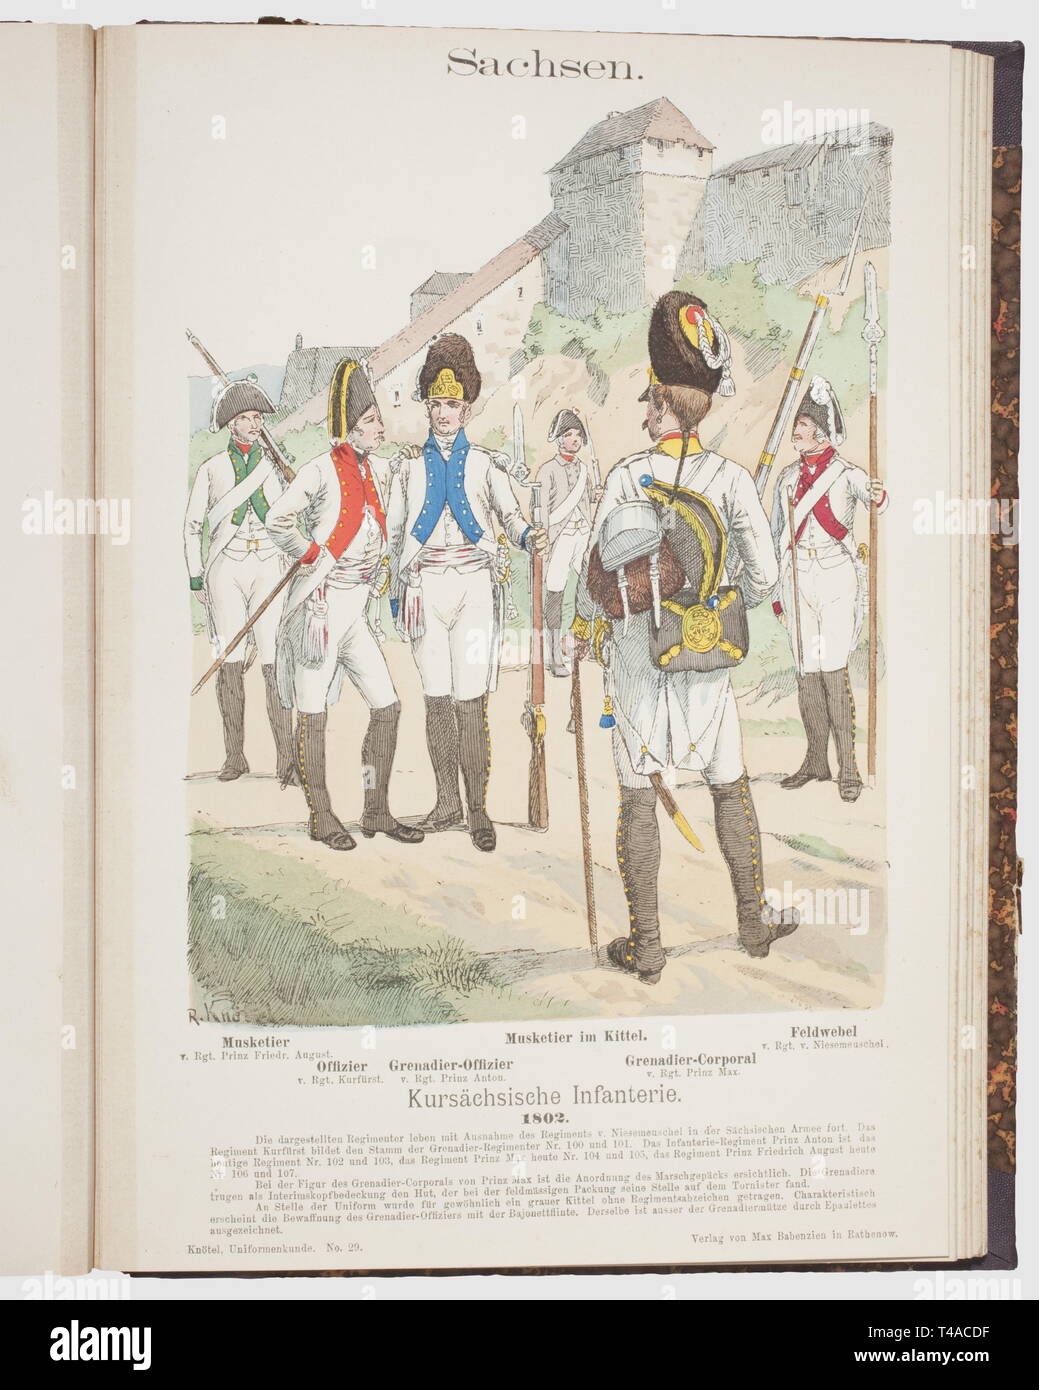 Richard Knötel, 'Uniformkunde - Lose Blätter zur Entwicklung der militärischen Tracht', ('Flying leaves' on the evolution of military dress), Rathenow and Hamburg (1892 - 1932). Complete edition in 18 volumes with 1,060 hand coloured tables depicting the evolution of European uniforms from the 17th to the 19th century. All volumes half-linen bound with gold-stamped spines. An important standard work, rarely offered as a complete set, historic, historical, people, 19th century, object, objects, stills, clipping, clippings, cut out, cut-out, cut-ou, Additional-Rights-Clearance-Info-Not-Available Stock Photo